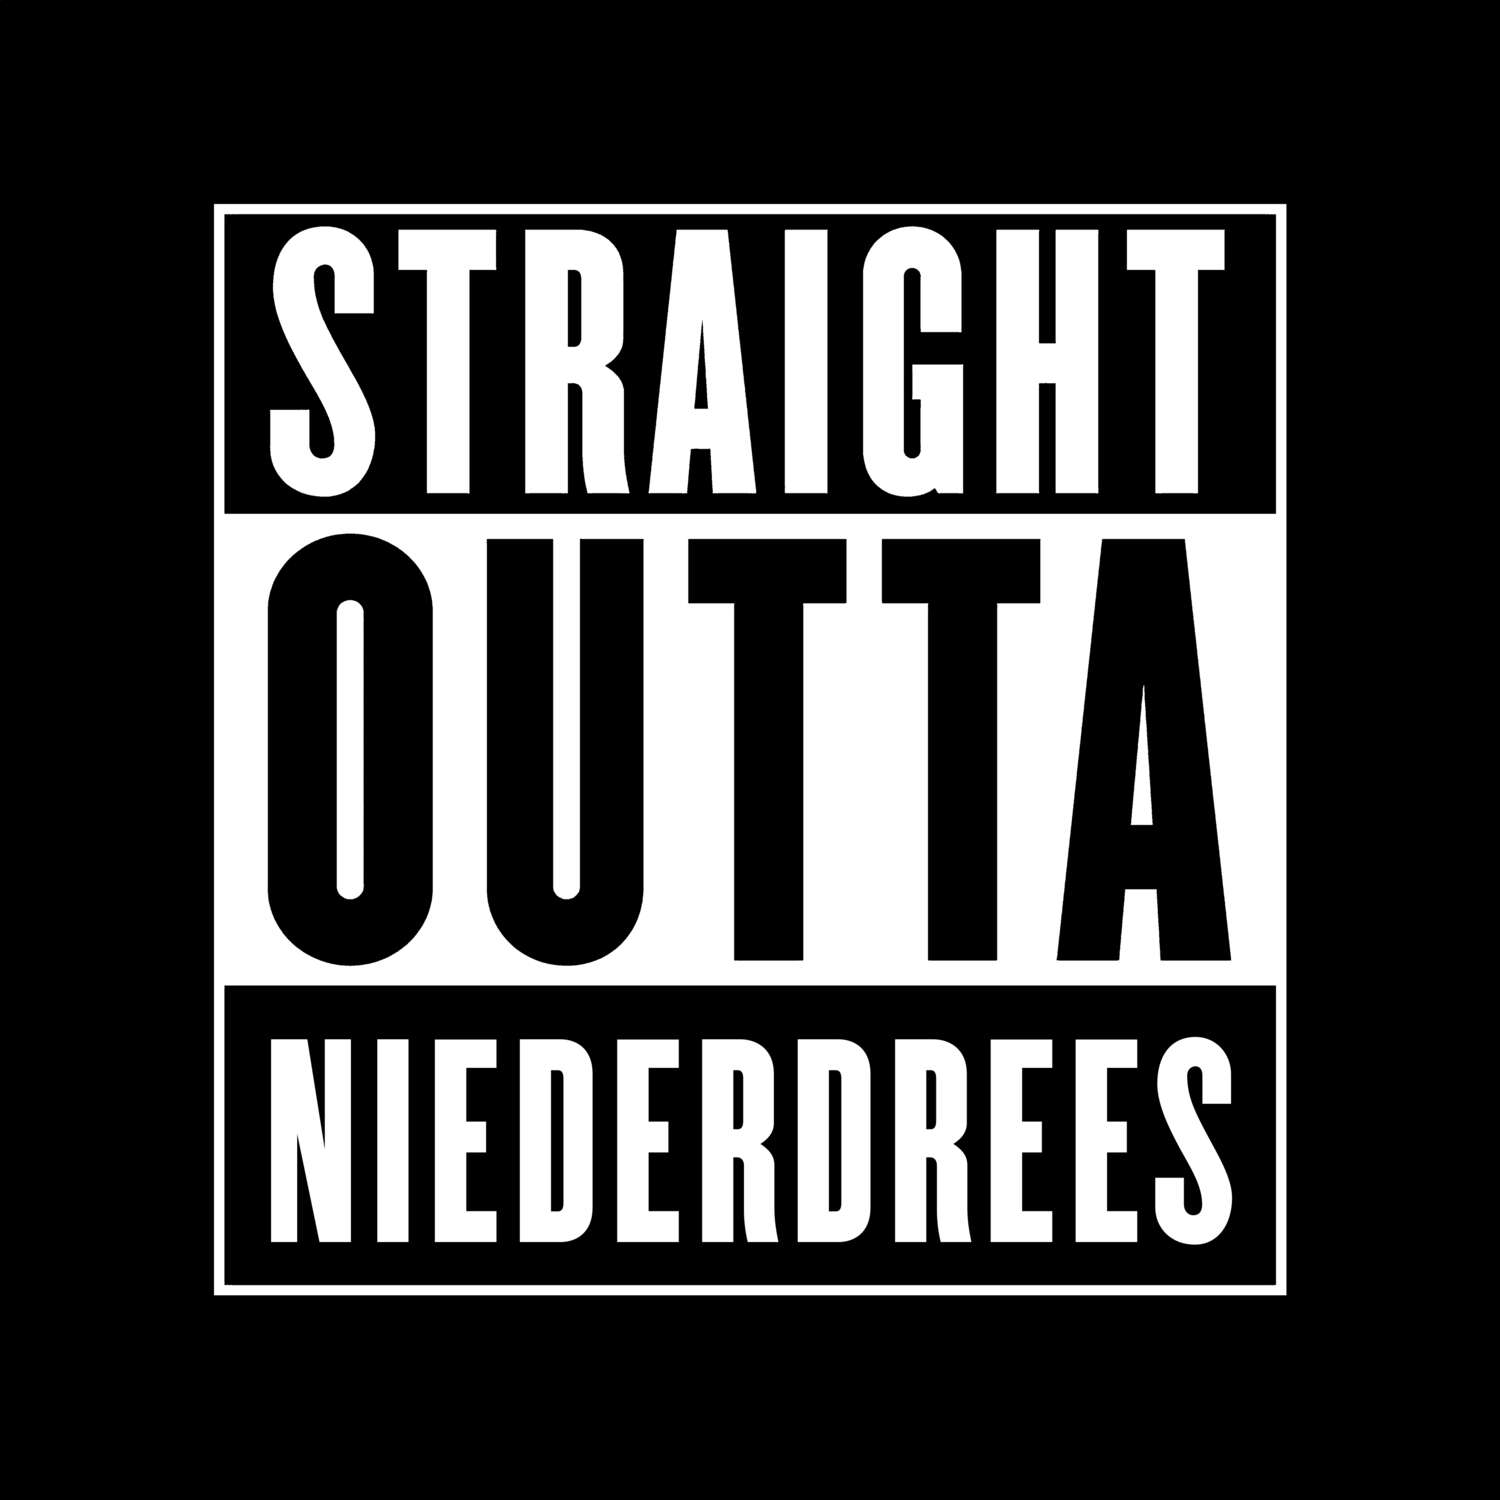 Niederdrees T-Shirt »Straight Outta«